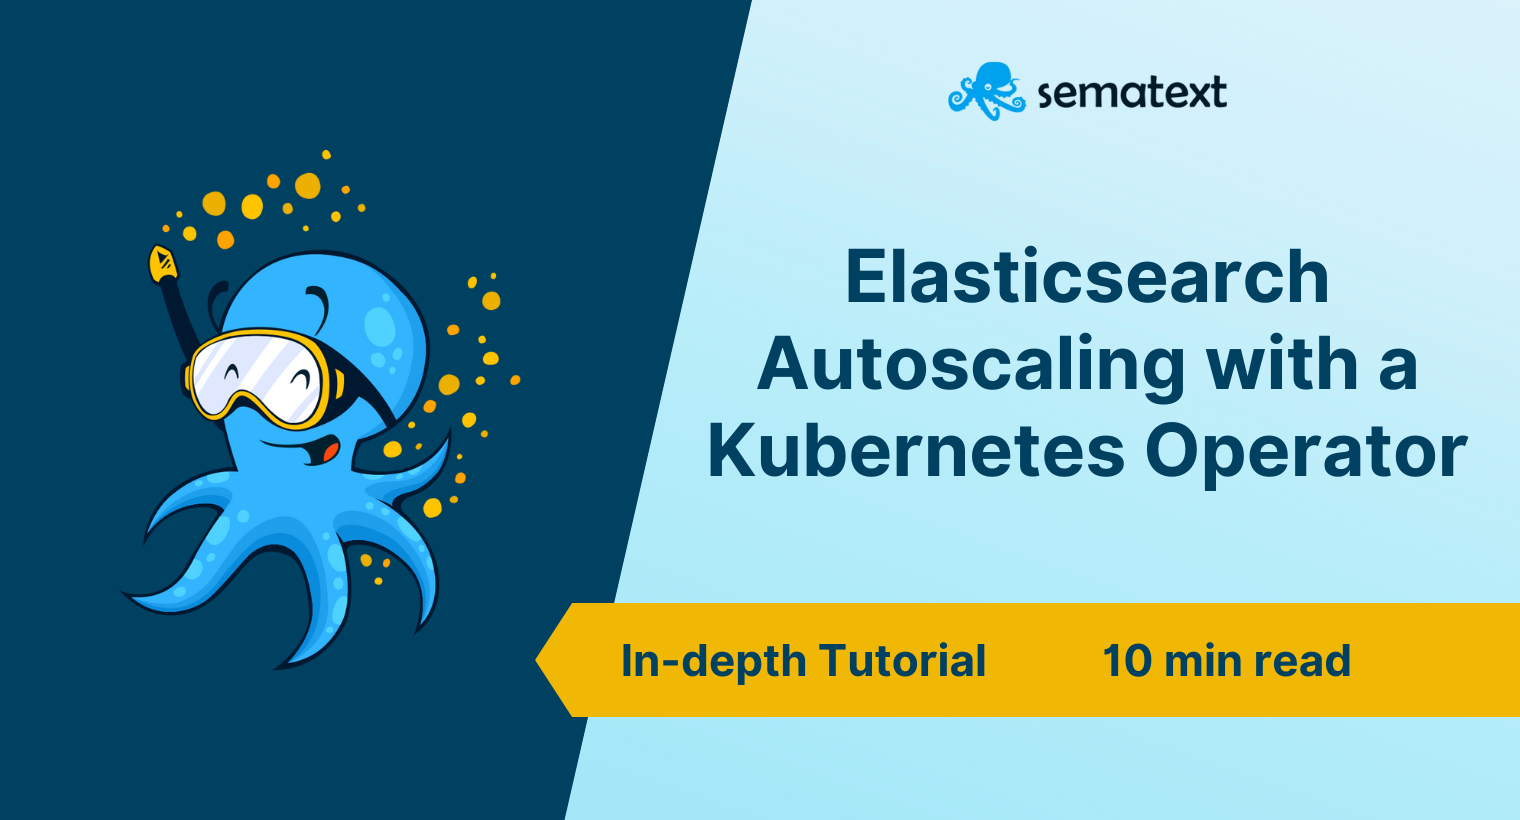 Autoscaling Elasticsearch Clusters for Logs: Using a Kubernetes Operator to Scale Up or Down